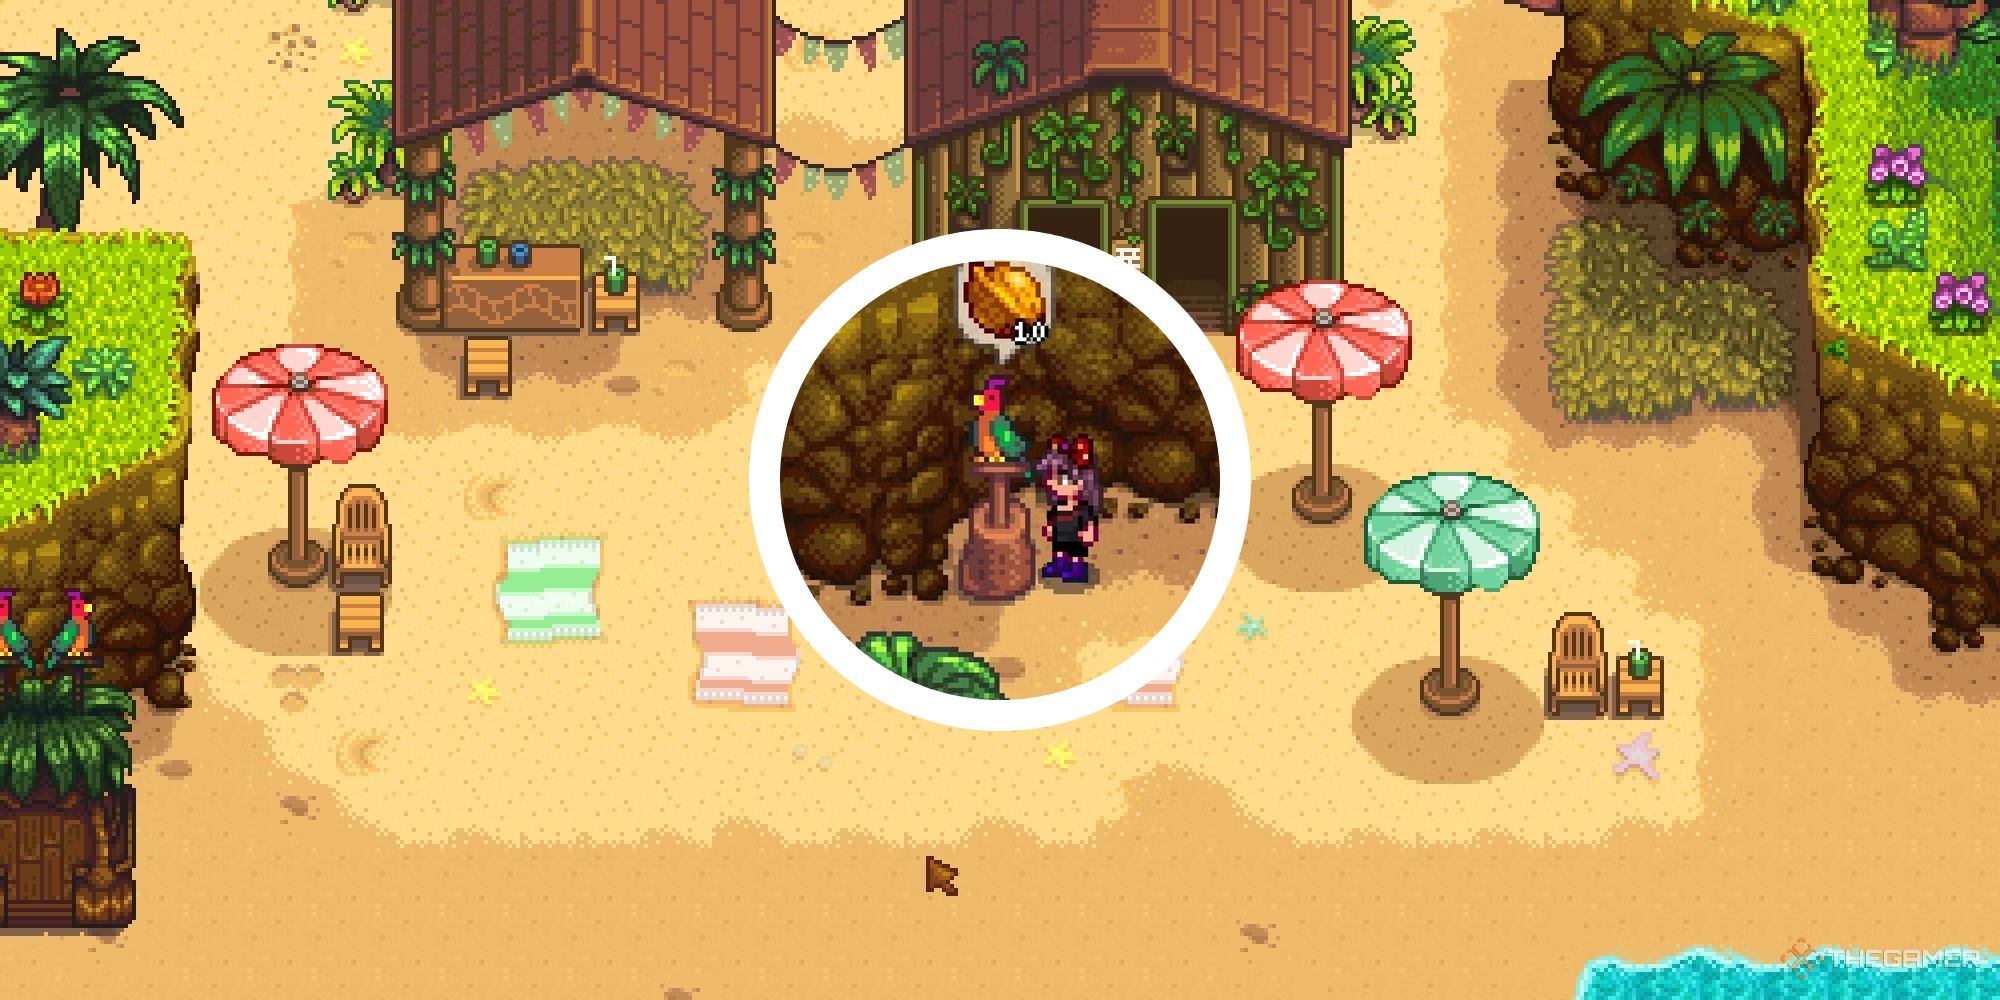 stardew valley ginger island resort in background with circle png of player at joja parrot